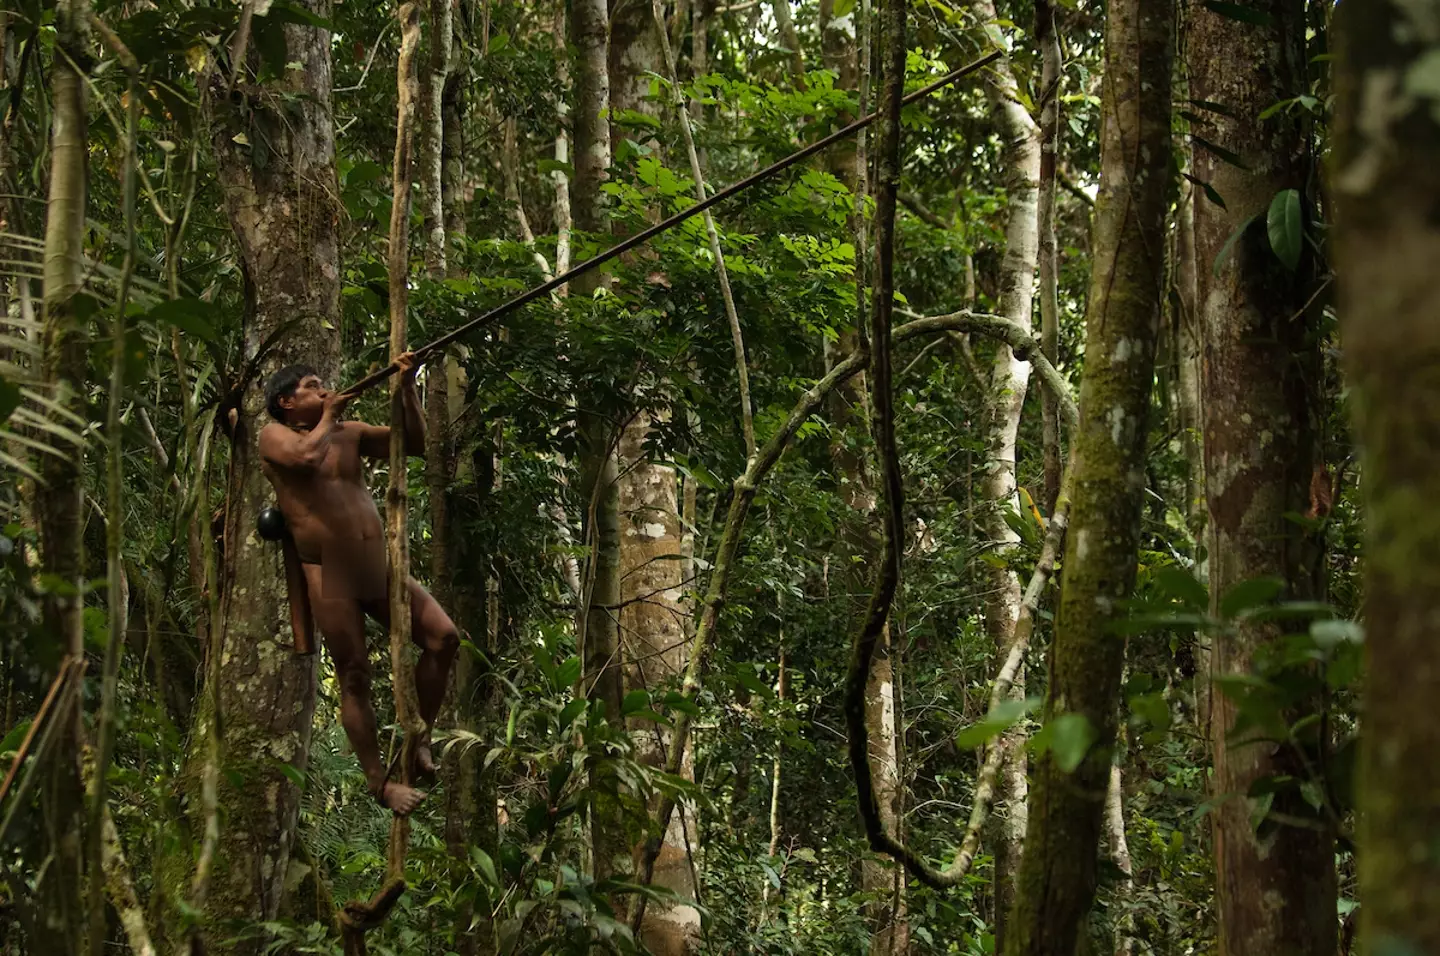 The Huaorani people are now pros at climbing trees.